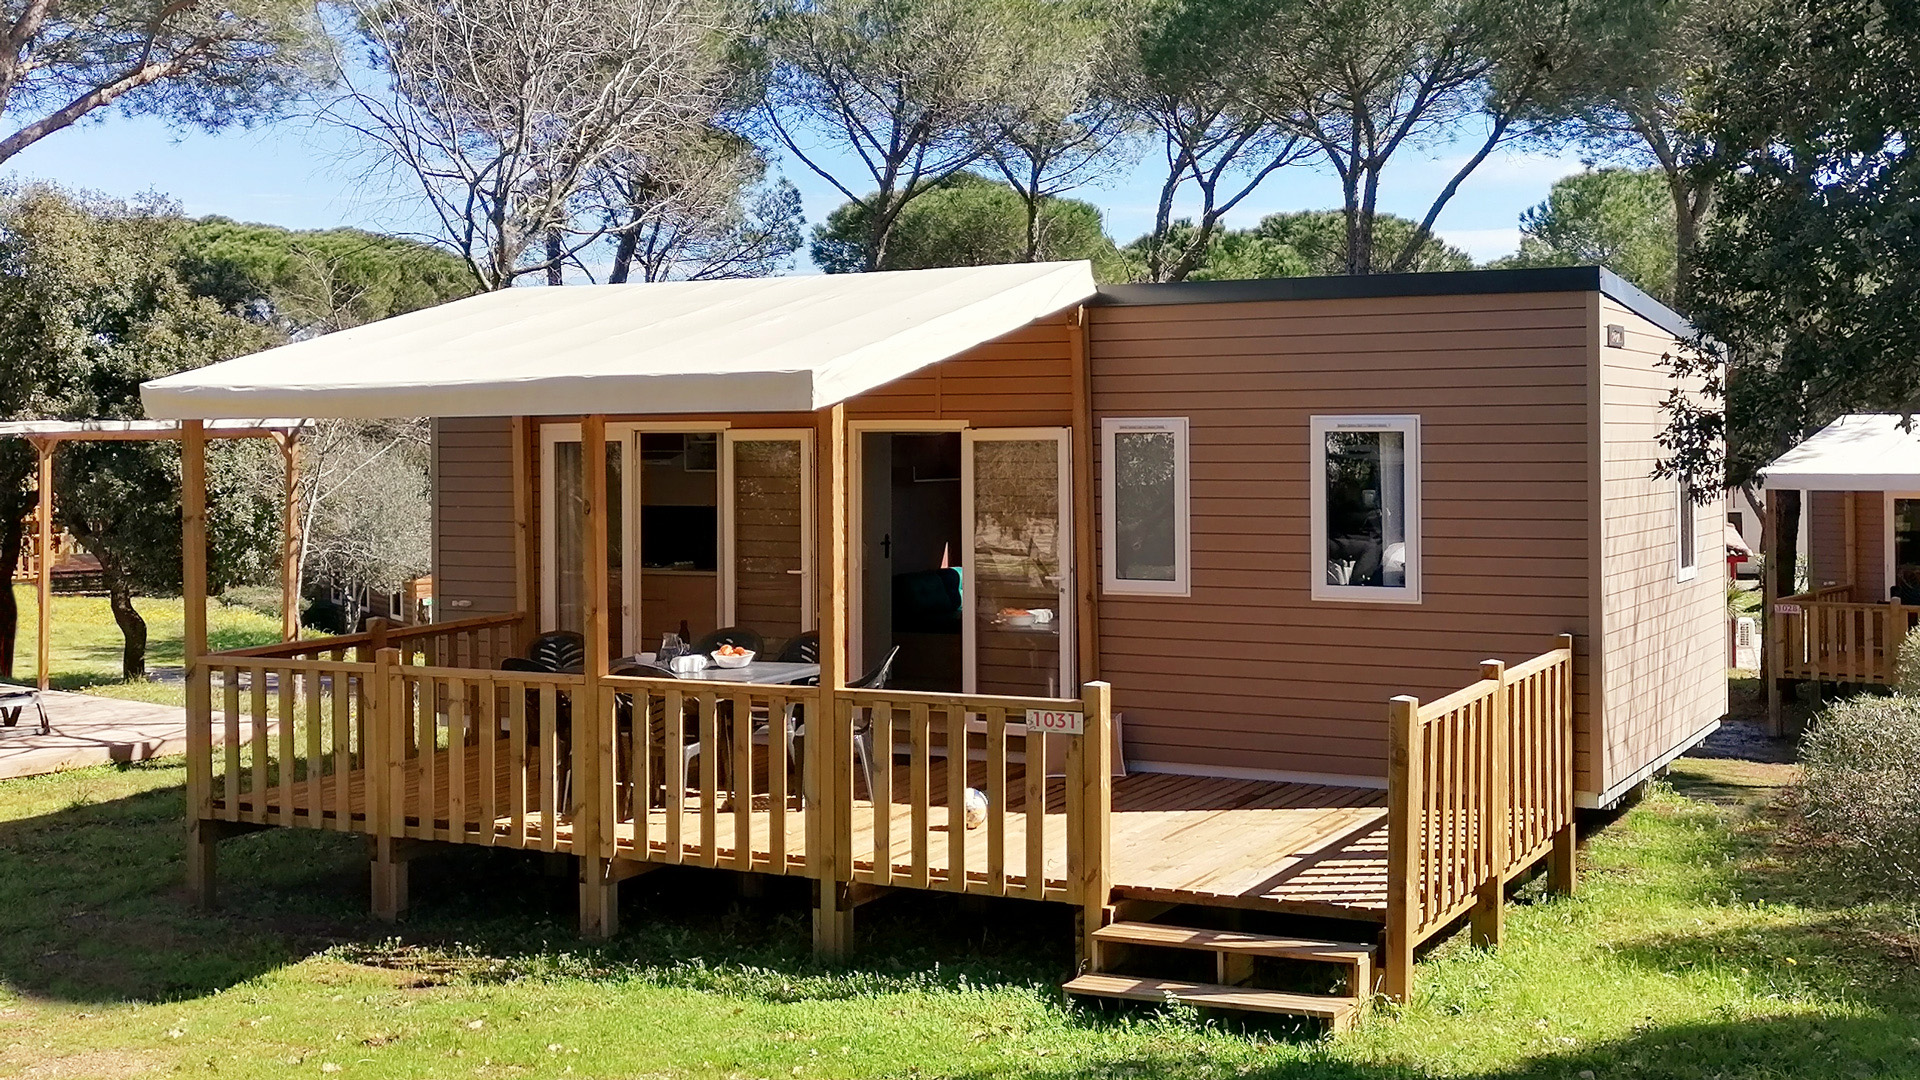 Location - Texas Standard - Camping Les Cigales, Le Muy